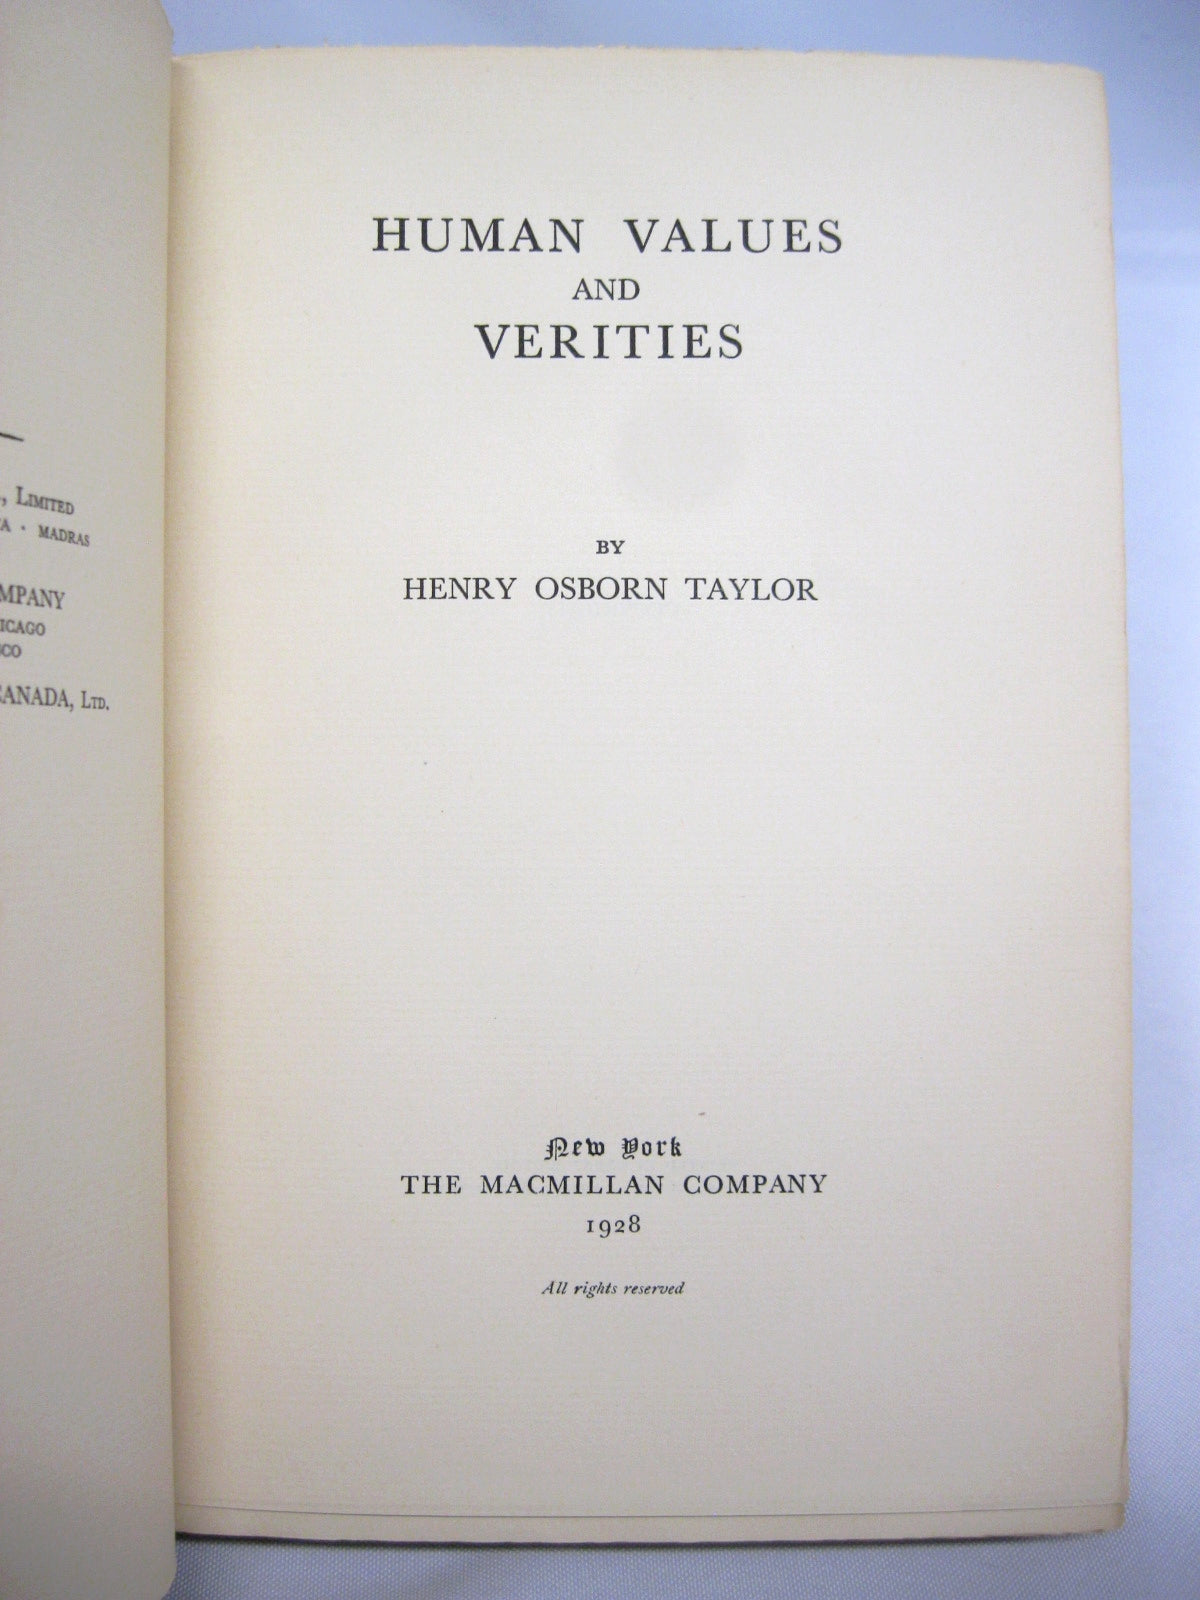 Human Values and Verities by Henry Osborn Taylor